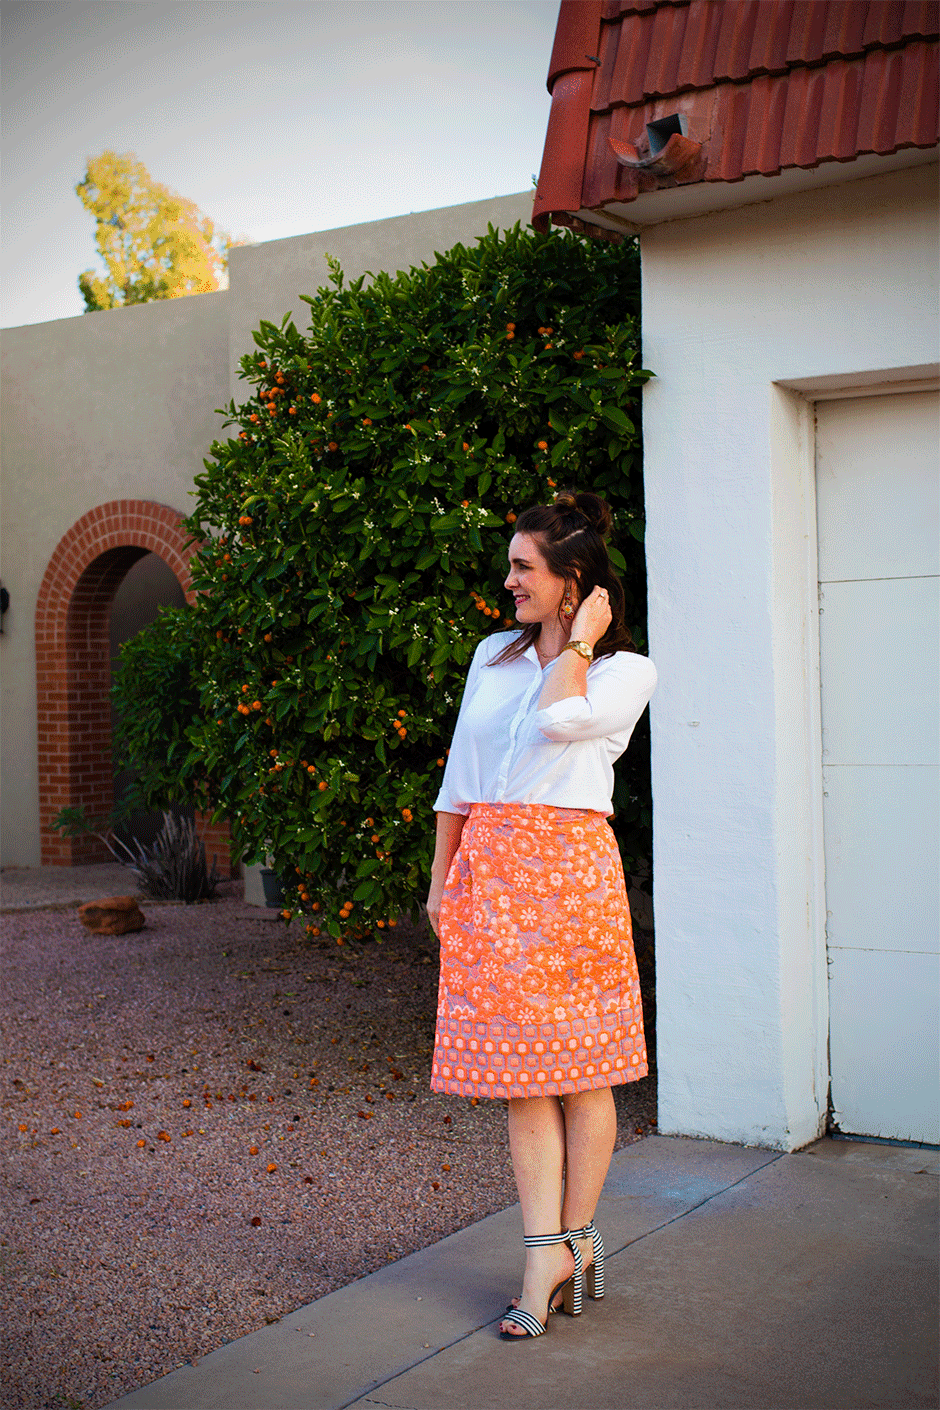 Create this DIY wrap skirt with some floral fabric for spring or summer. The perfect sewing project for warm weather.